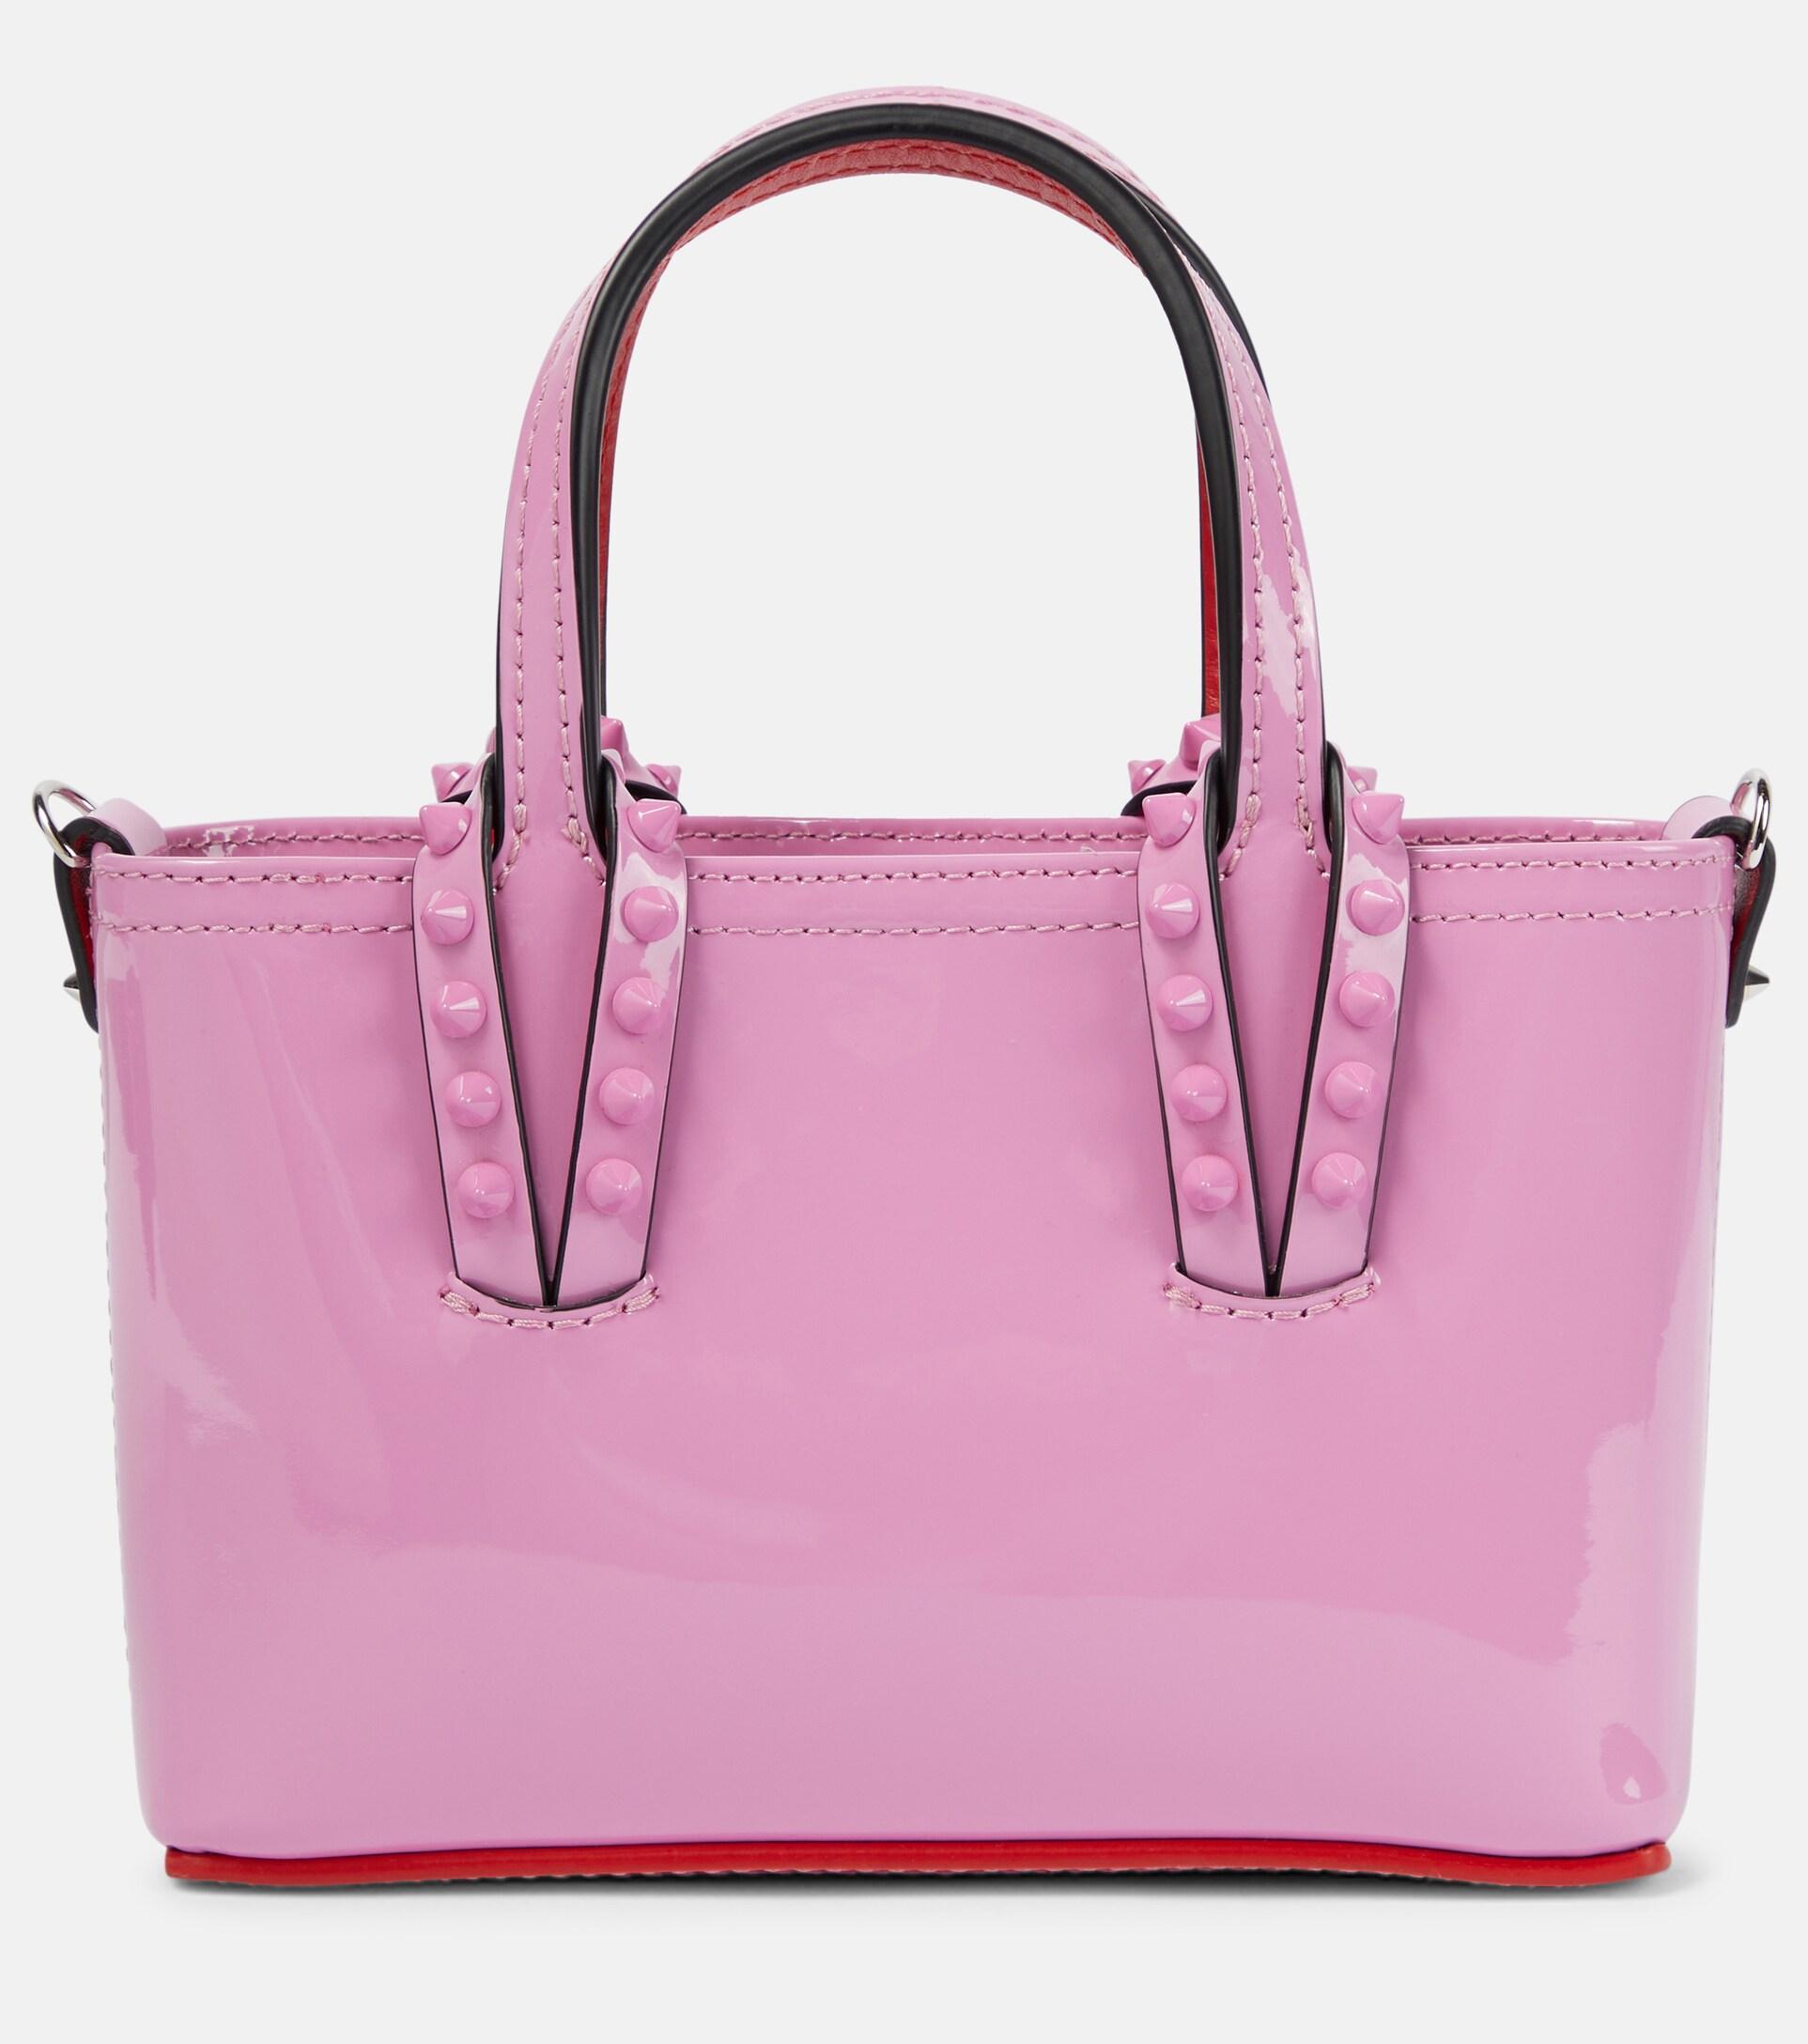 New Christian Louboutin Nano Cabata East/West Leather Tote Pink